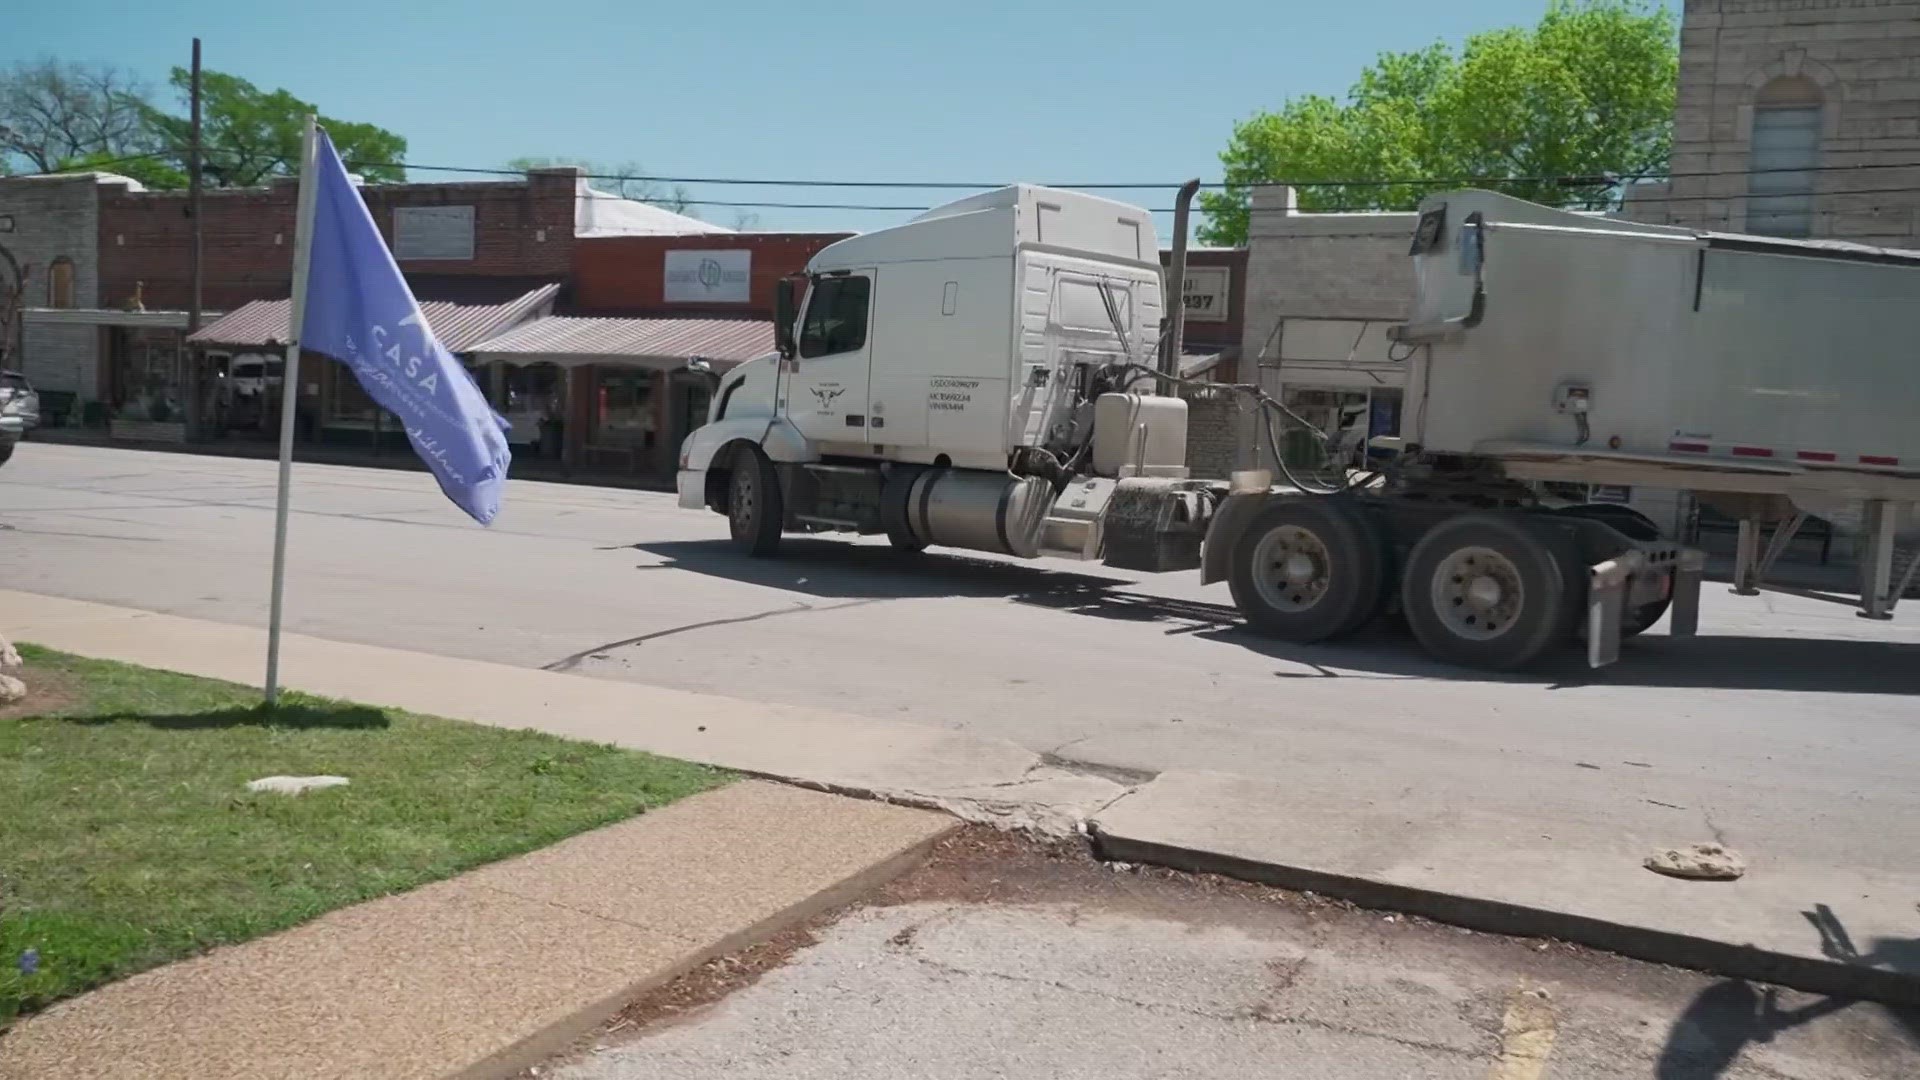 City leaders in Glen Rose are urging TxDOT to move faster on plans to force 18-wheelers that drive through the tourist town's main square to take new routes.